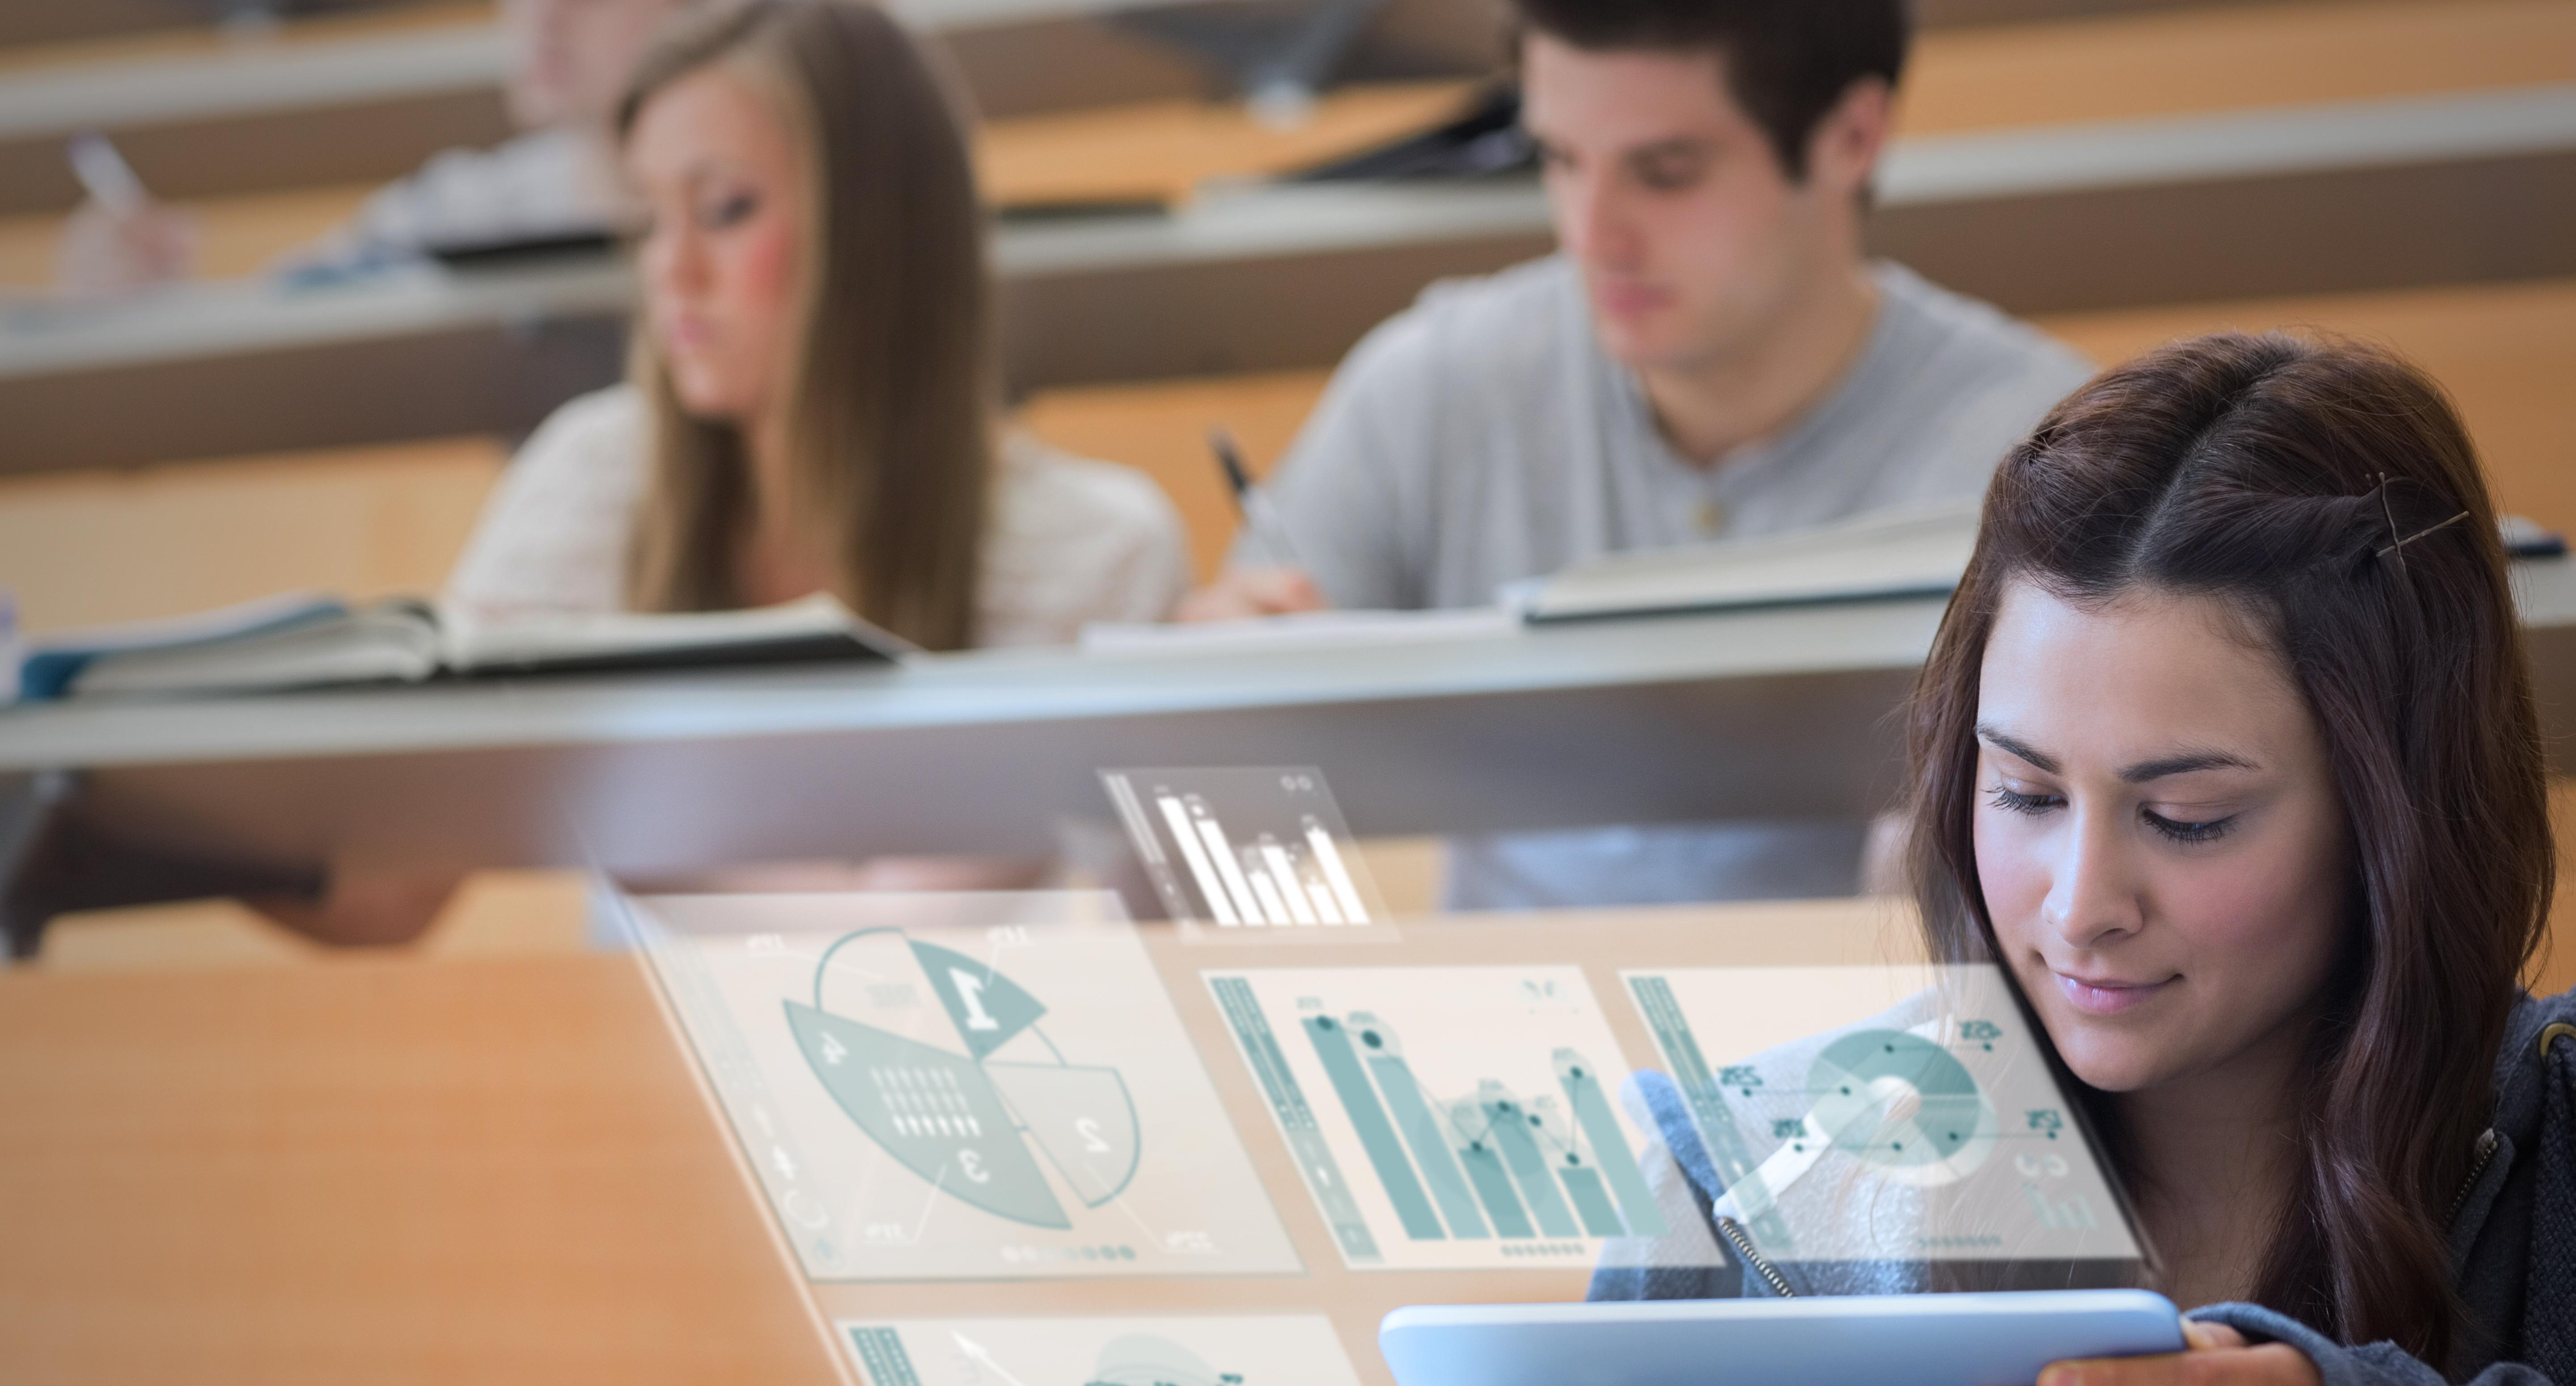 Student in a lecture theatre looking at a laptop with two other students in the row of seating behind, who are are writing notes. Superimposed on the image are data charts and graphs.